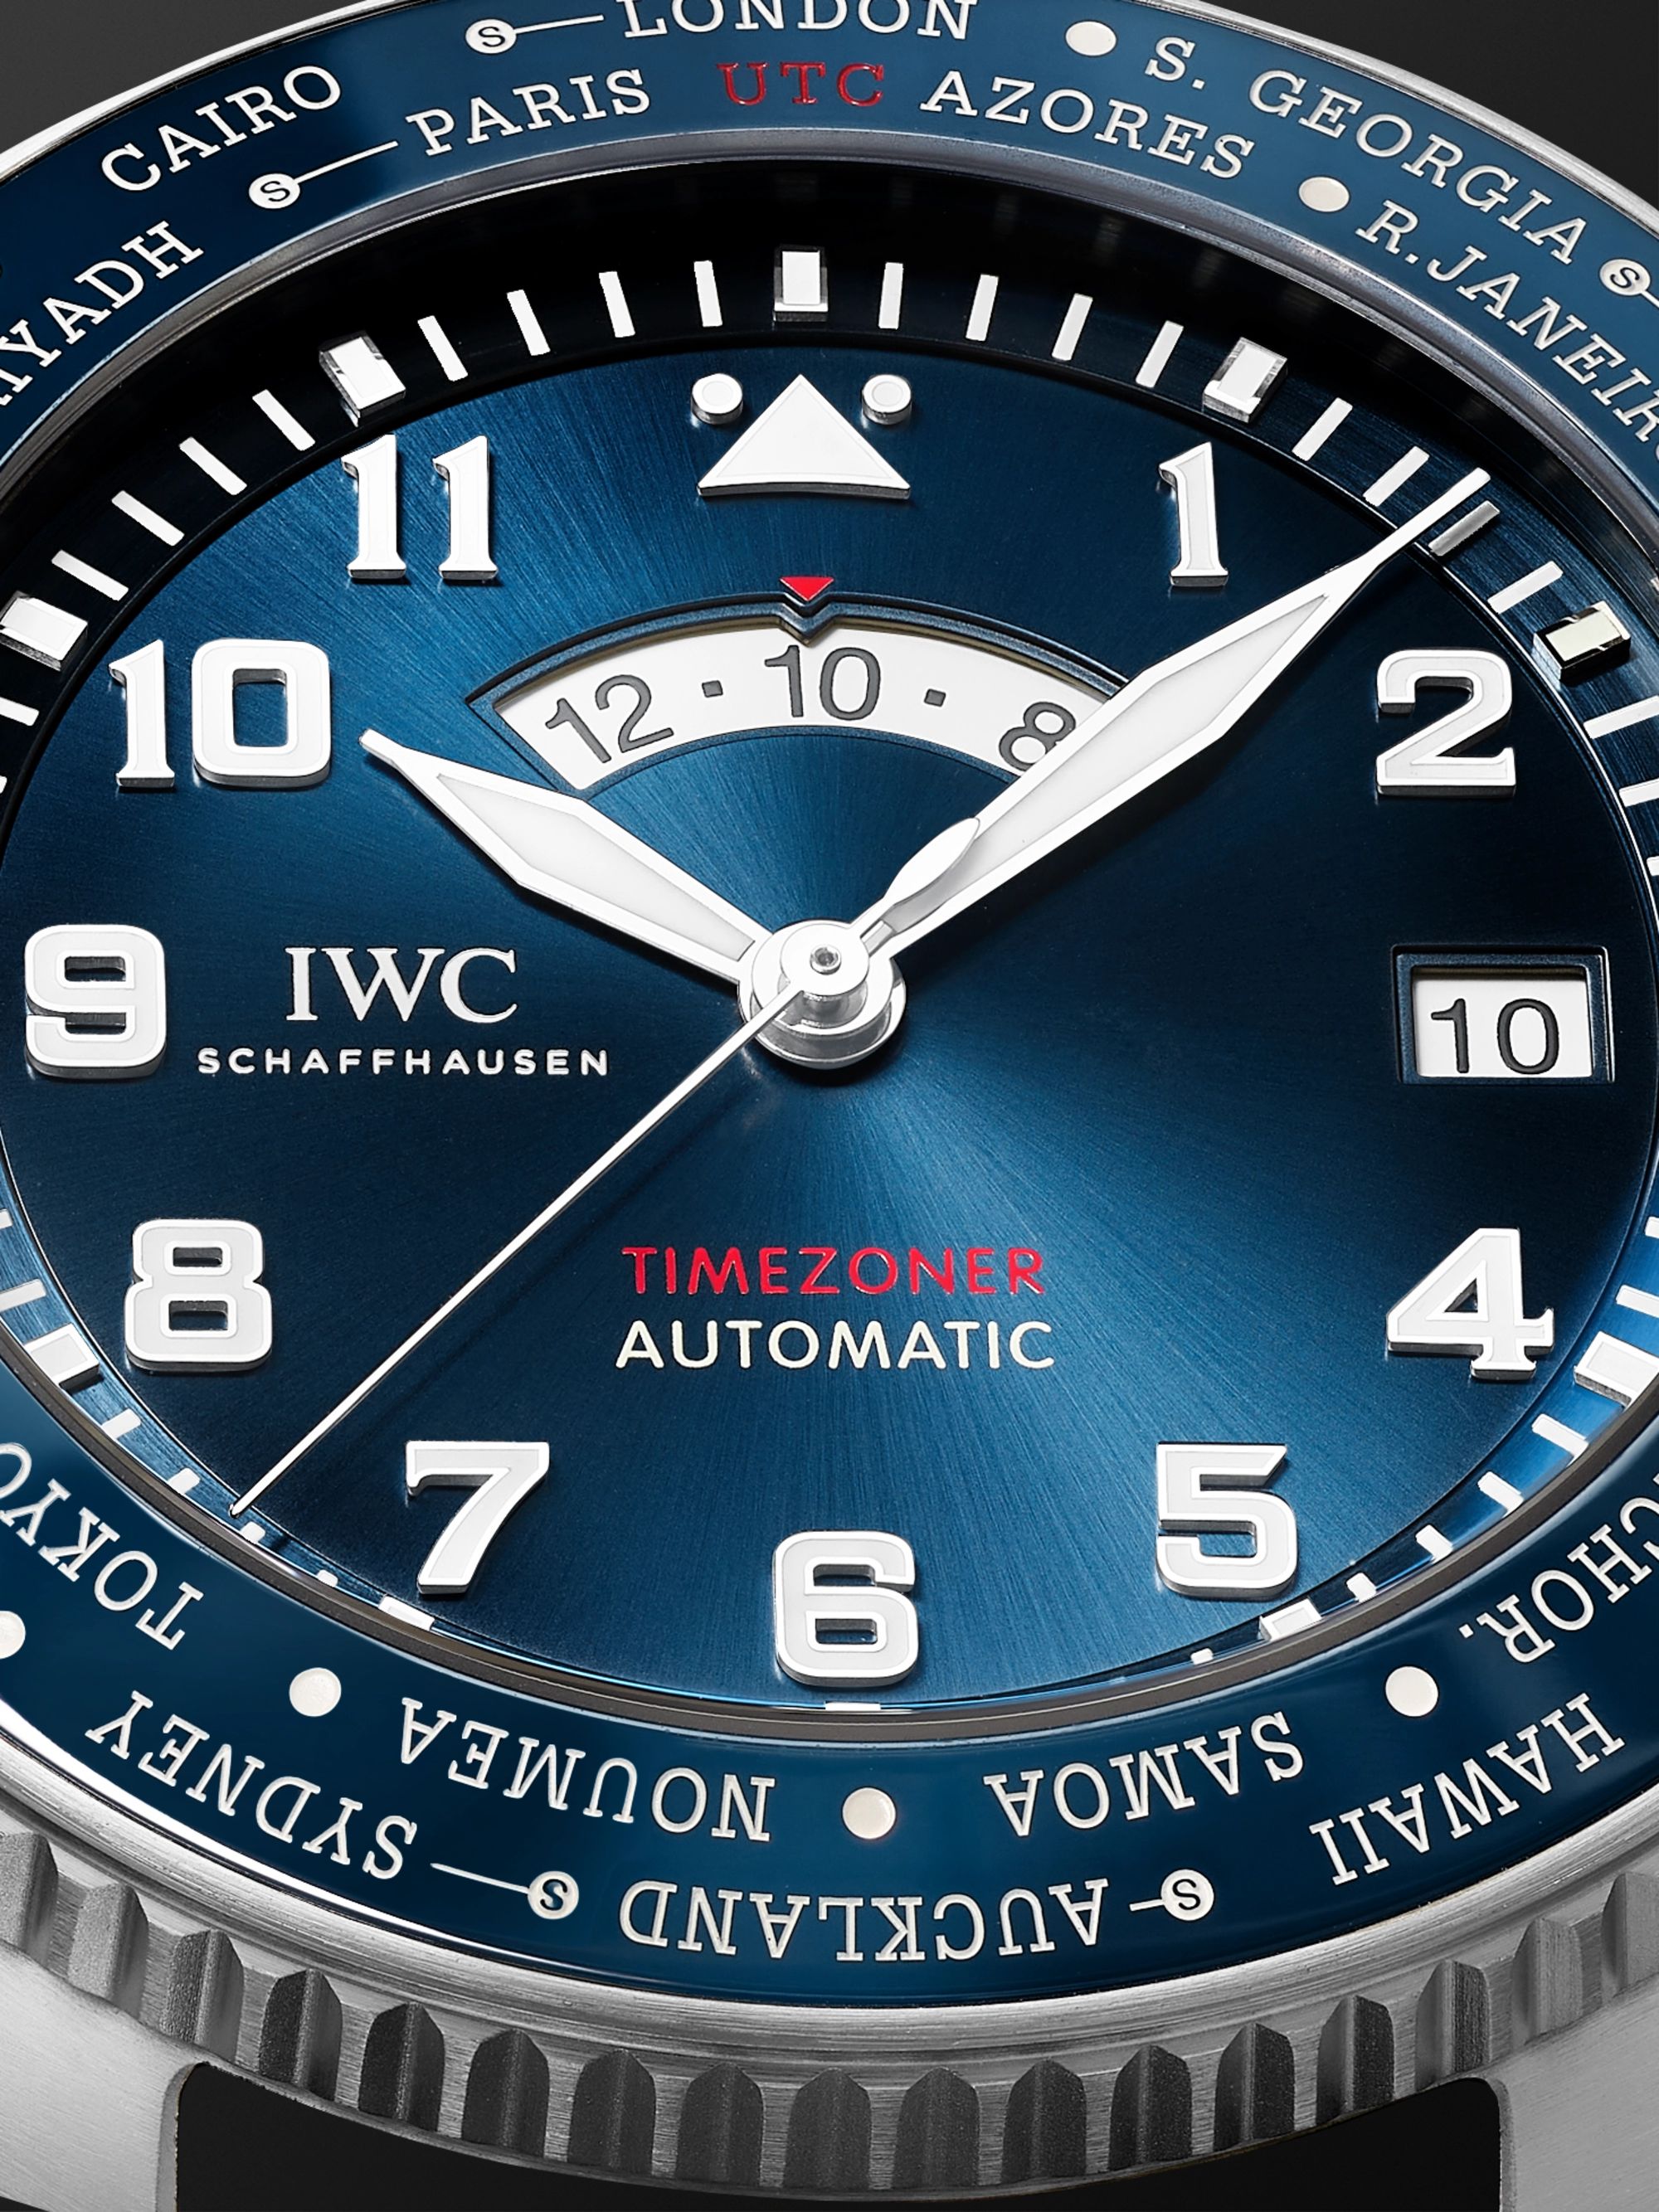 IWC SCHAFFHAUSEN Pilot’s Watch Timezoner Le Petit Prince Limited Edition Automatic 46mm Stainless Steel and Leather Watch, Ref. No. IW395503